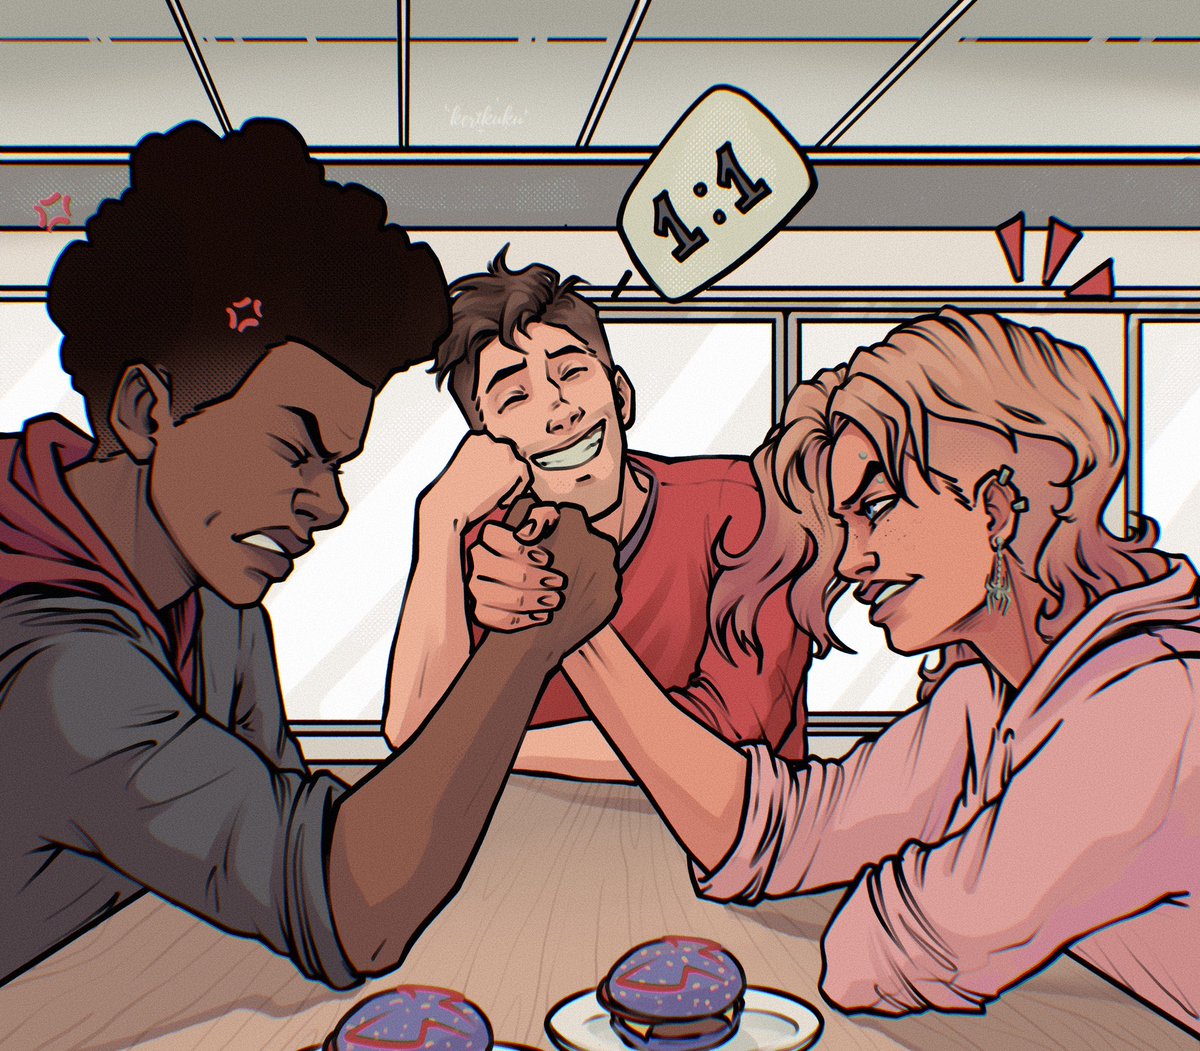 Peter B Parker thinks it’s going to be a draw 😁 
#GwenStacy #MilesMorales #PeterBParker #spiderverse